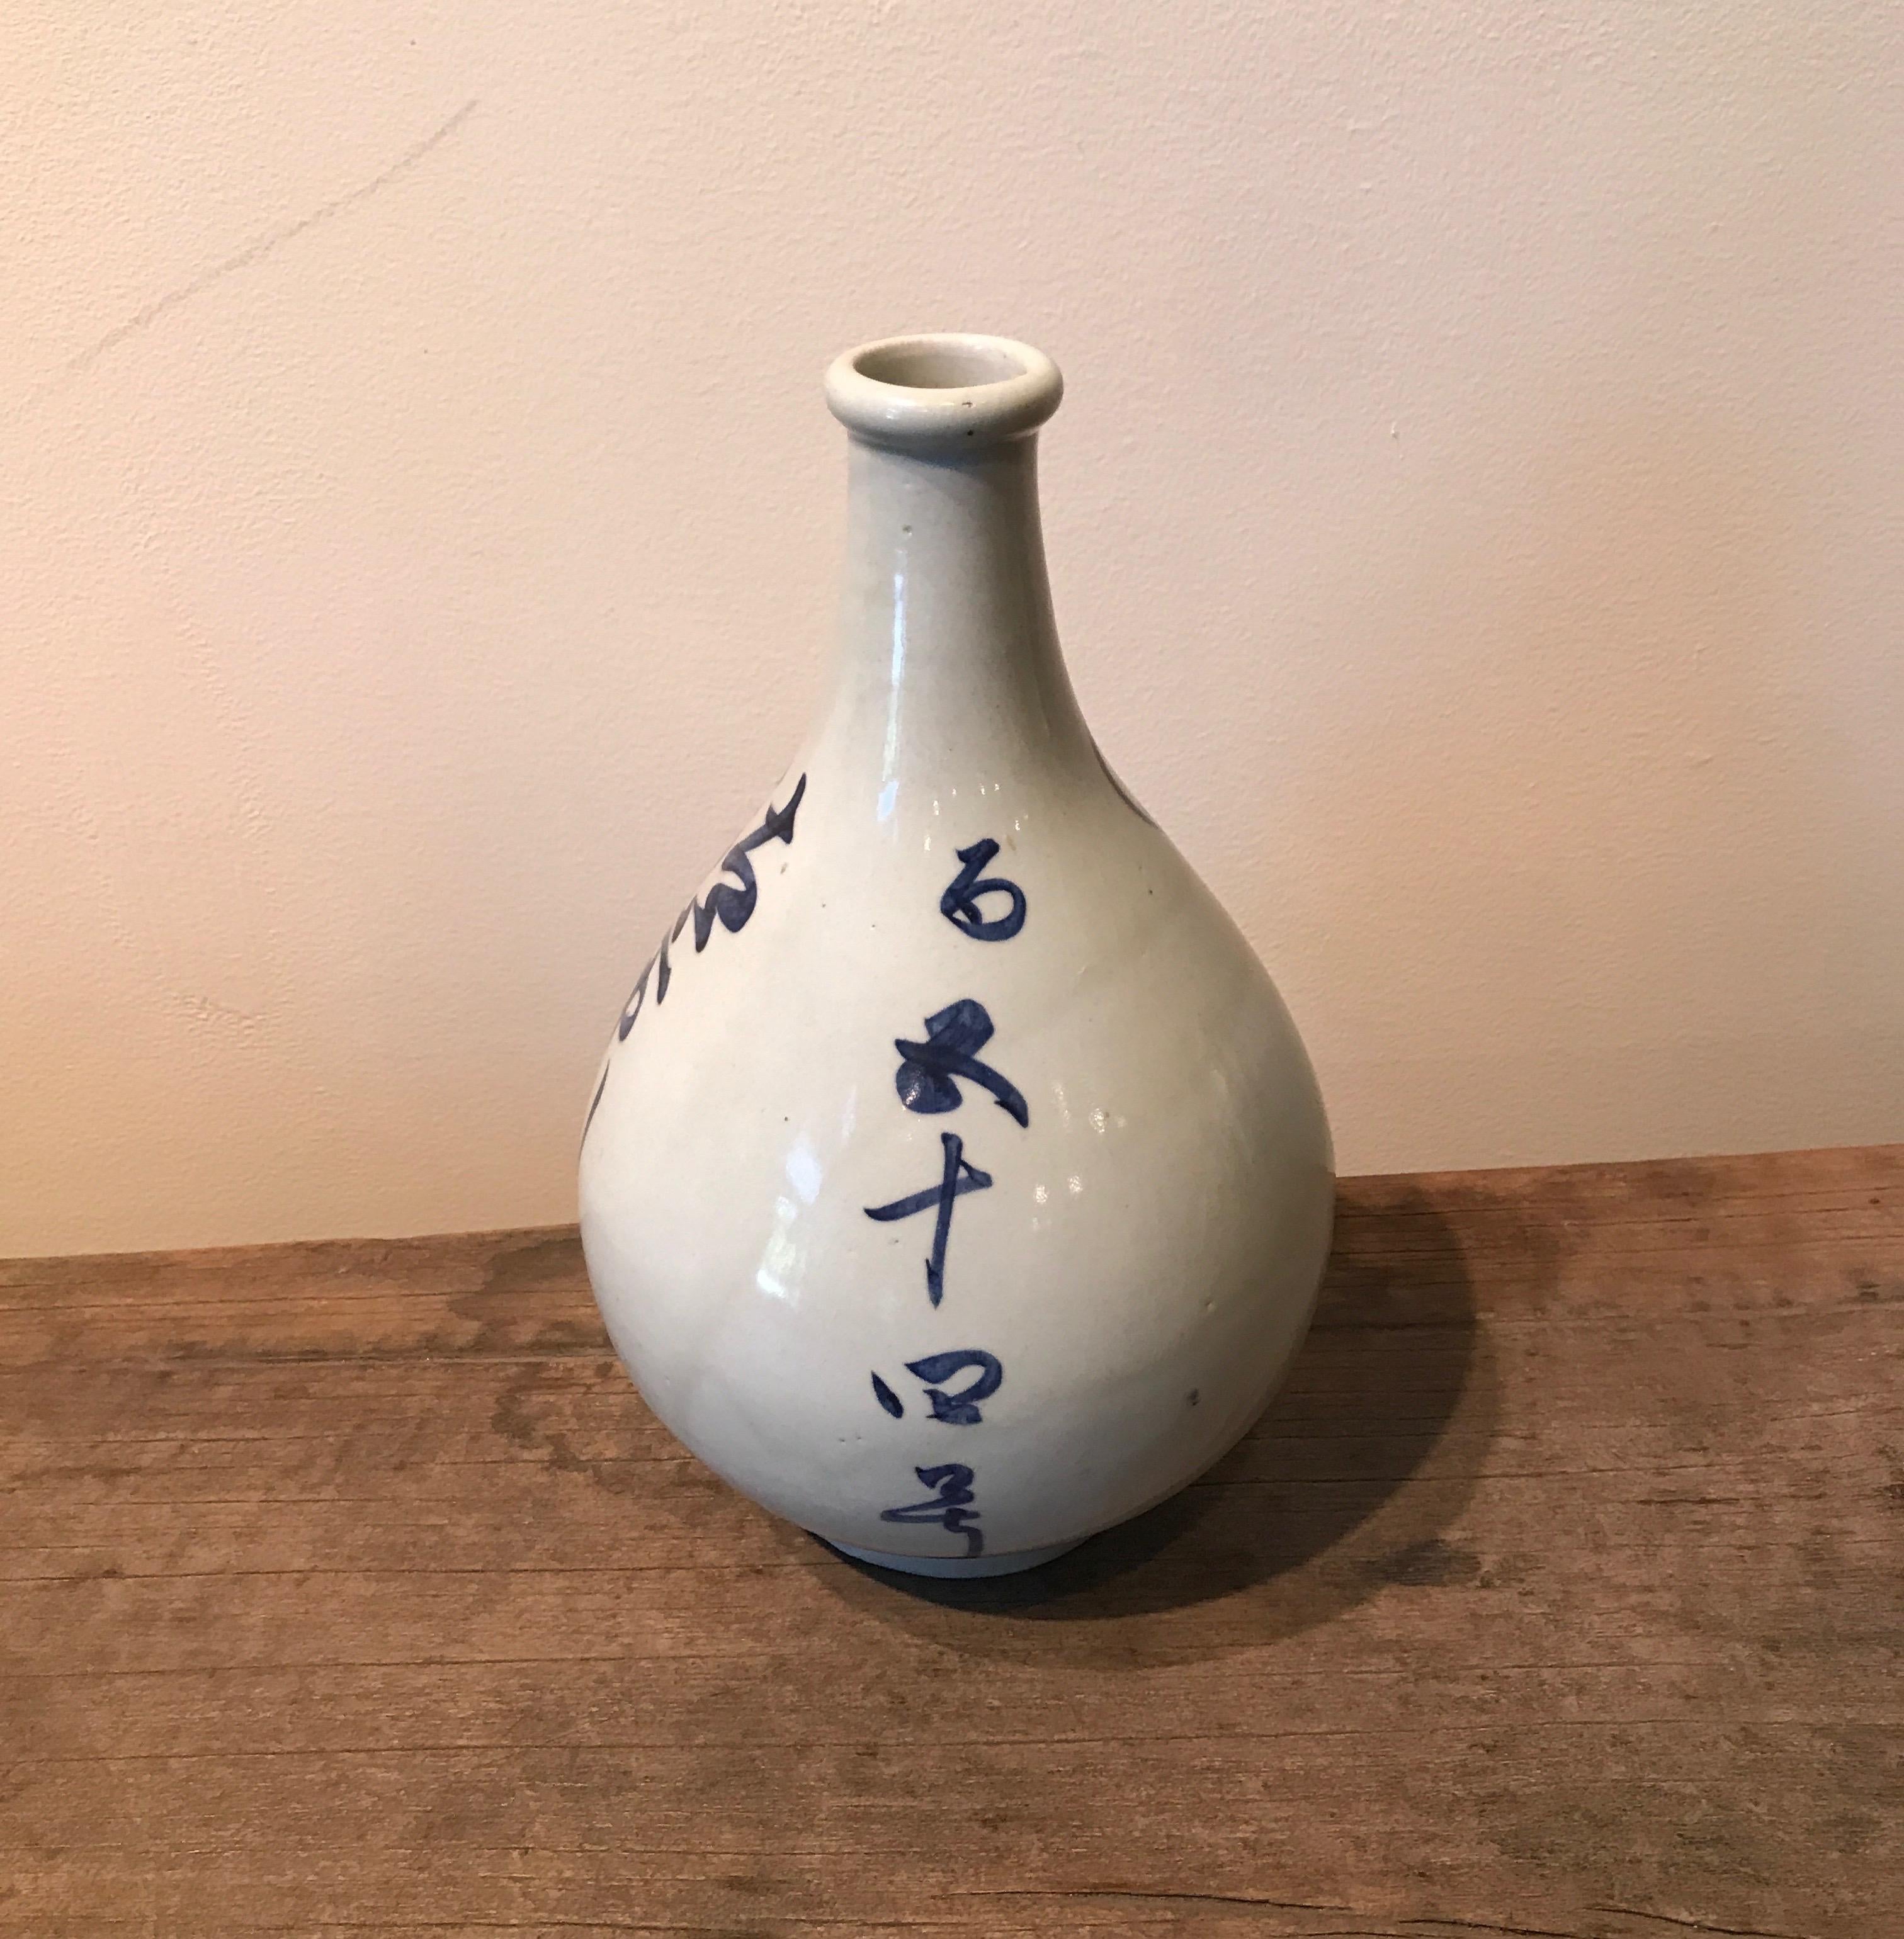 Vintage Japanese Sake Bottle with Hand Painted Calligraphy 1